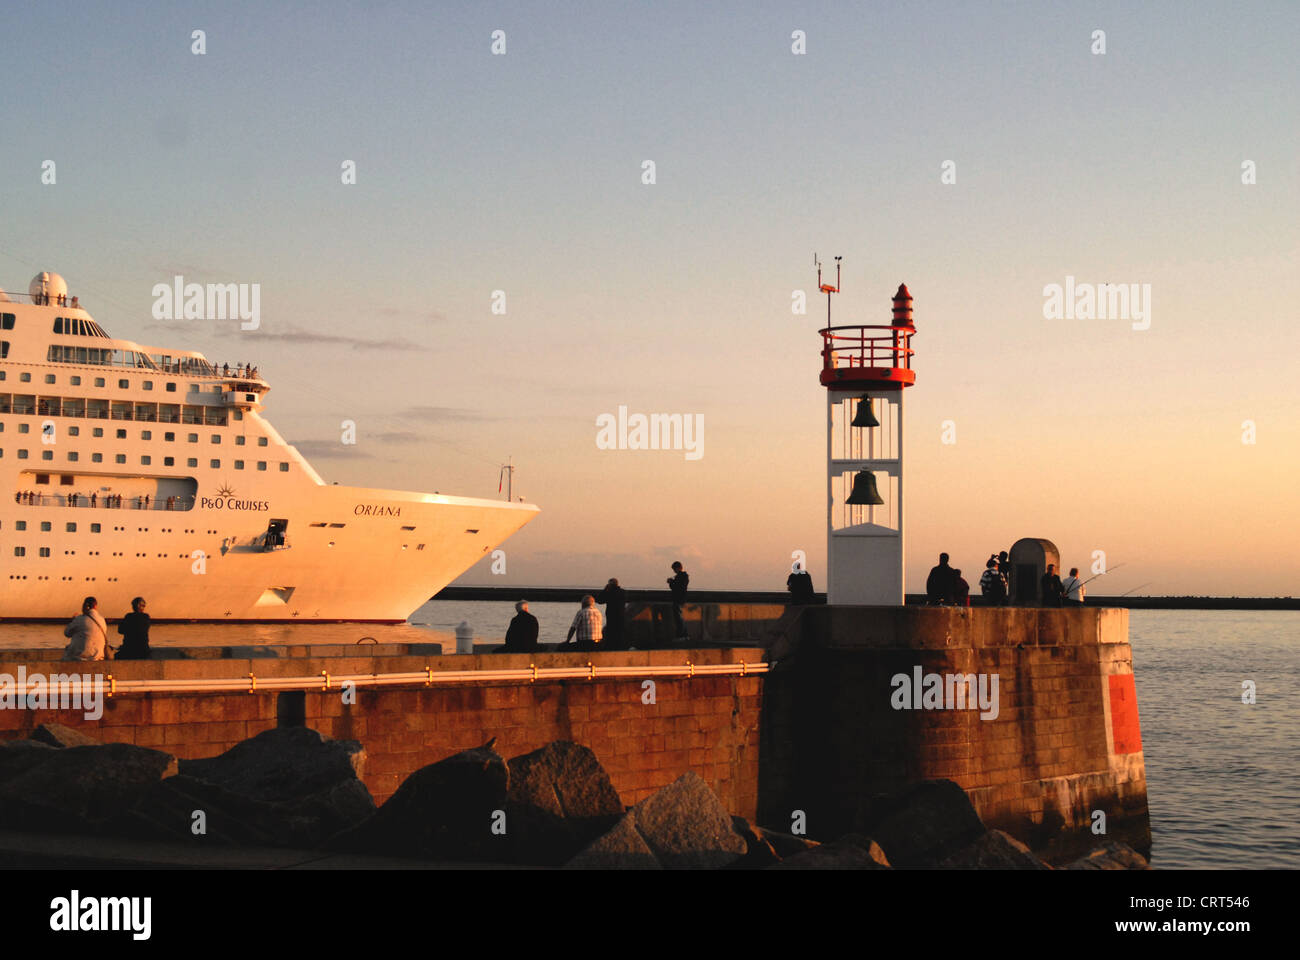 P & O cruise ship leaving the port of Le Havre in Normandy, France, at sun set. Stock Photo